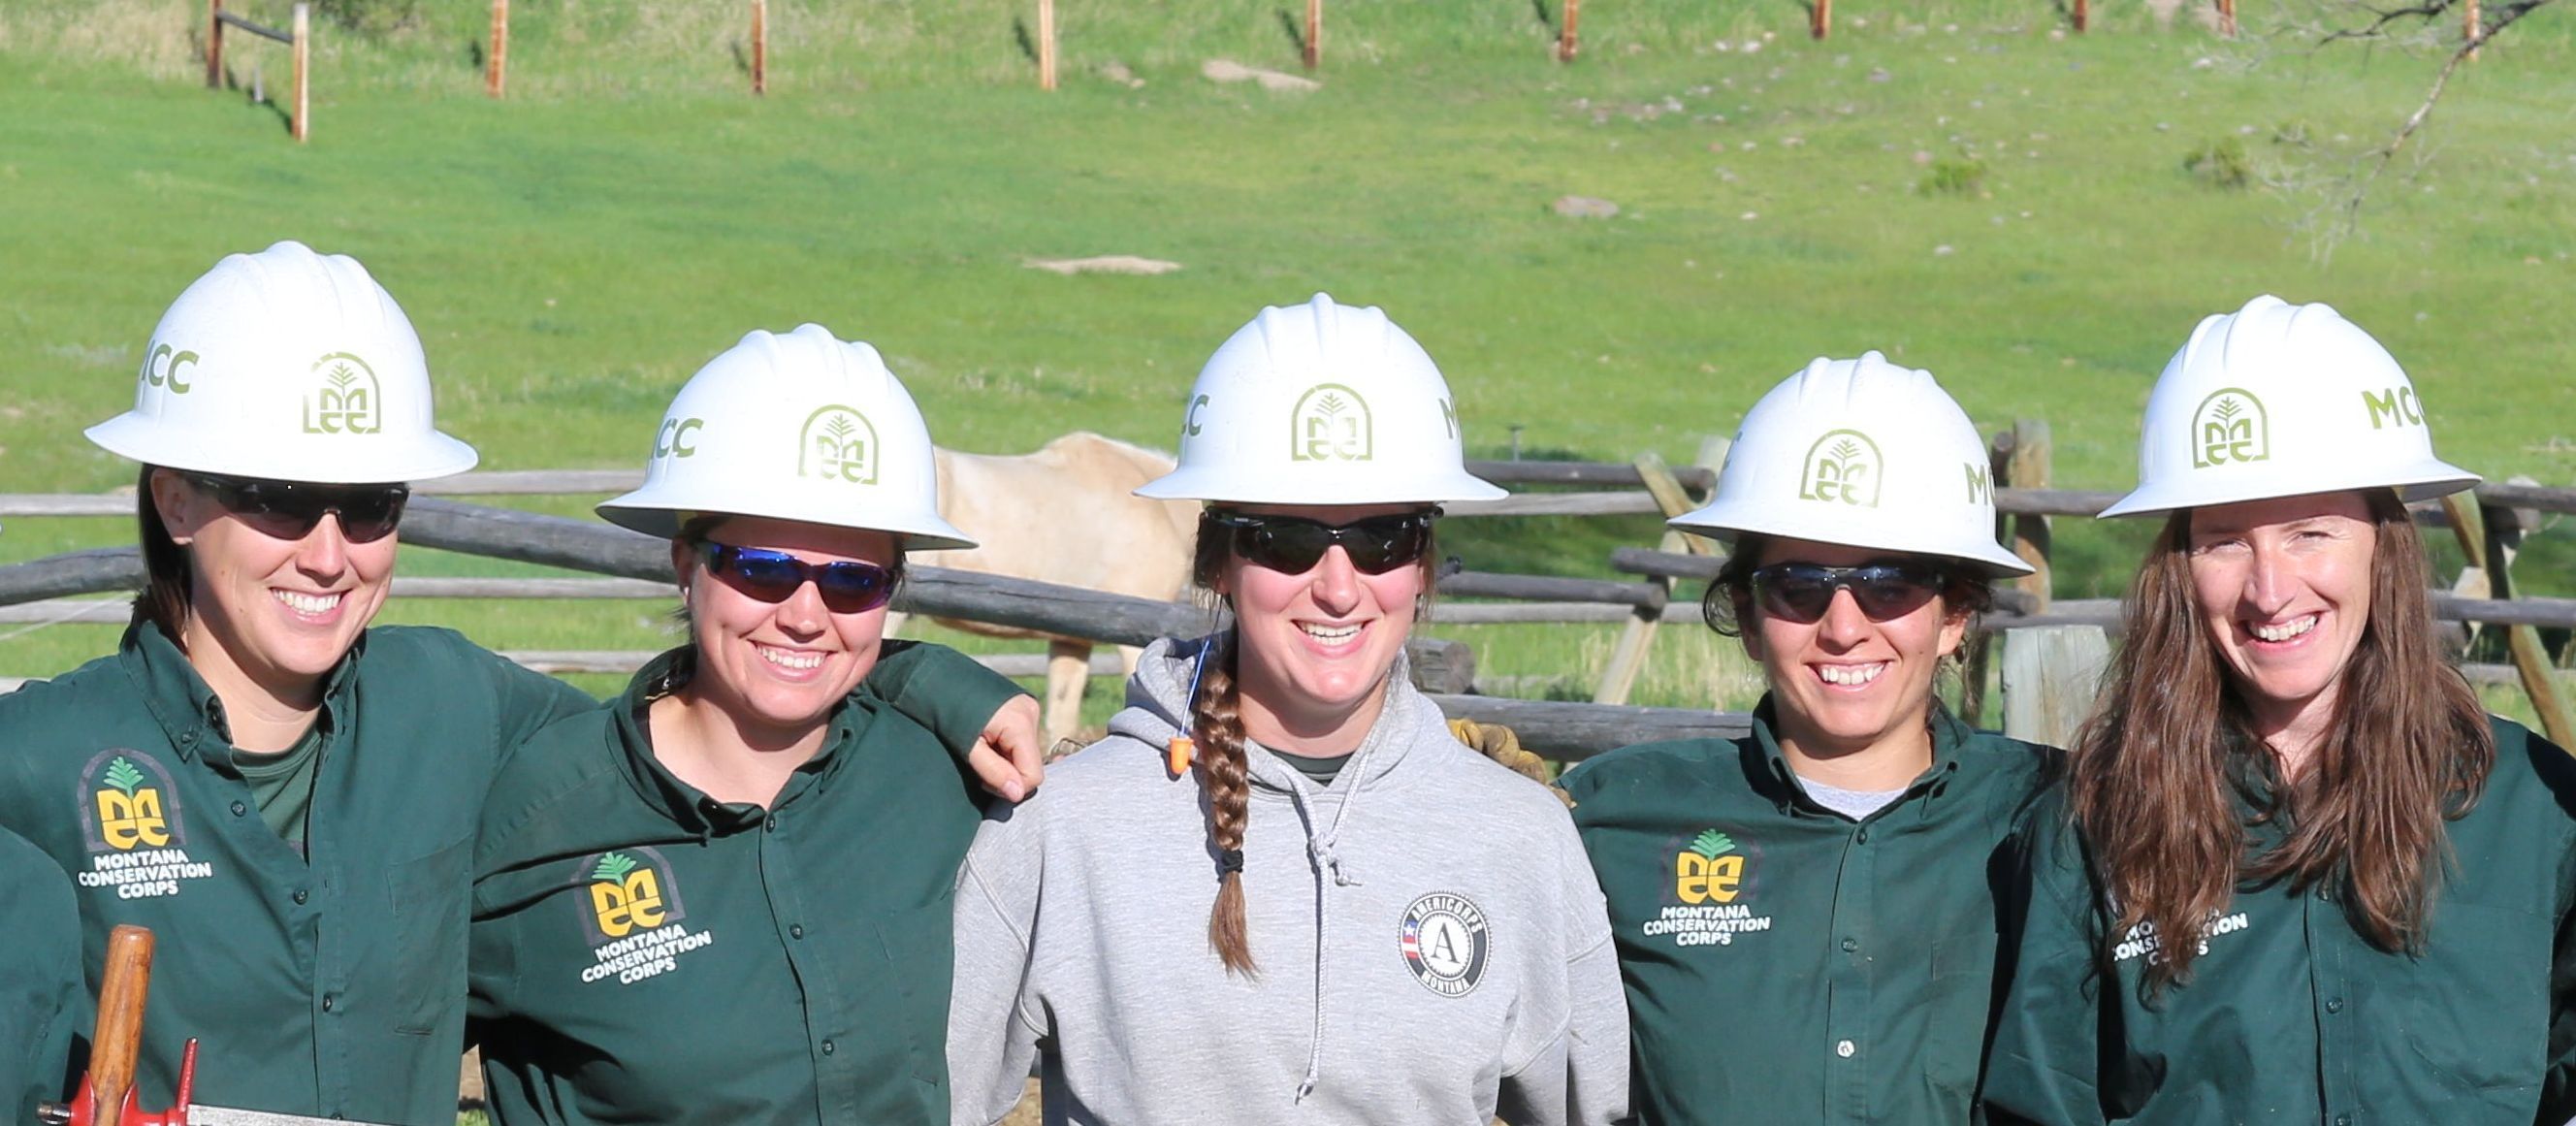 [Image Description: Five MCC members standing together smiling, all wearing MCC shirts and hard hats in front of a horse corral, with one horse behind them.]